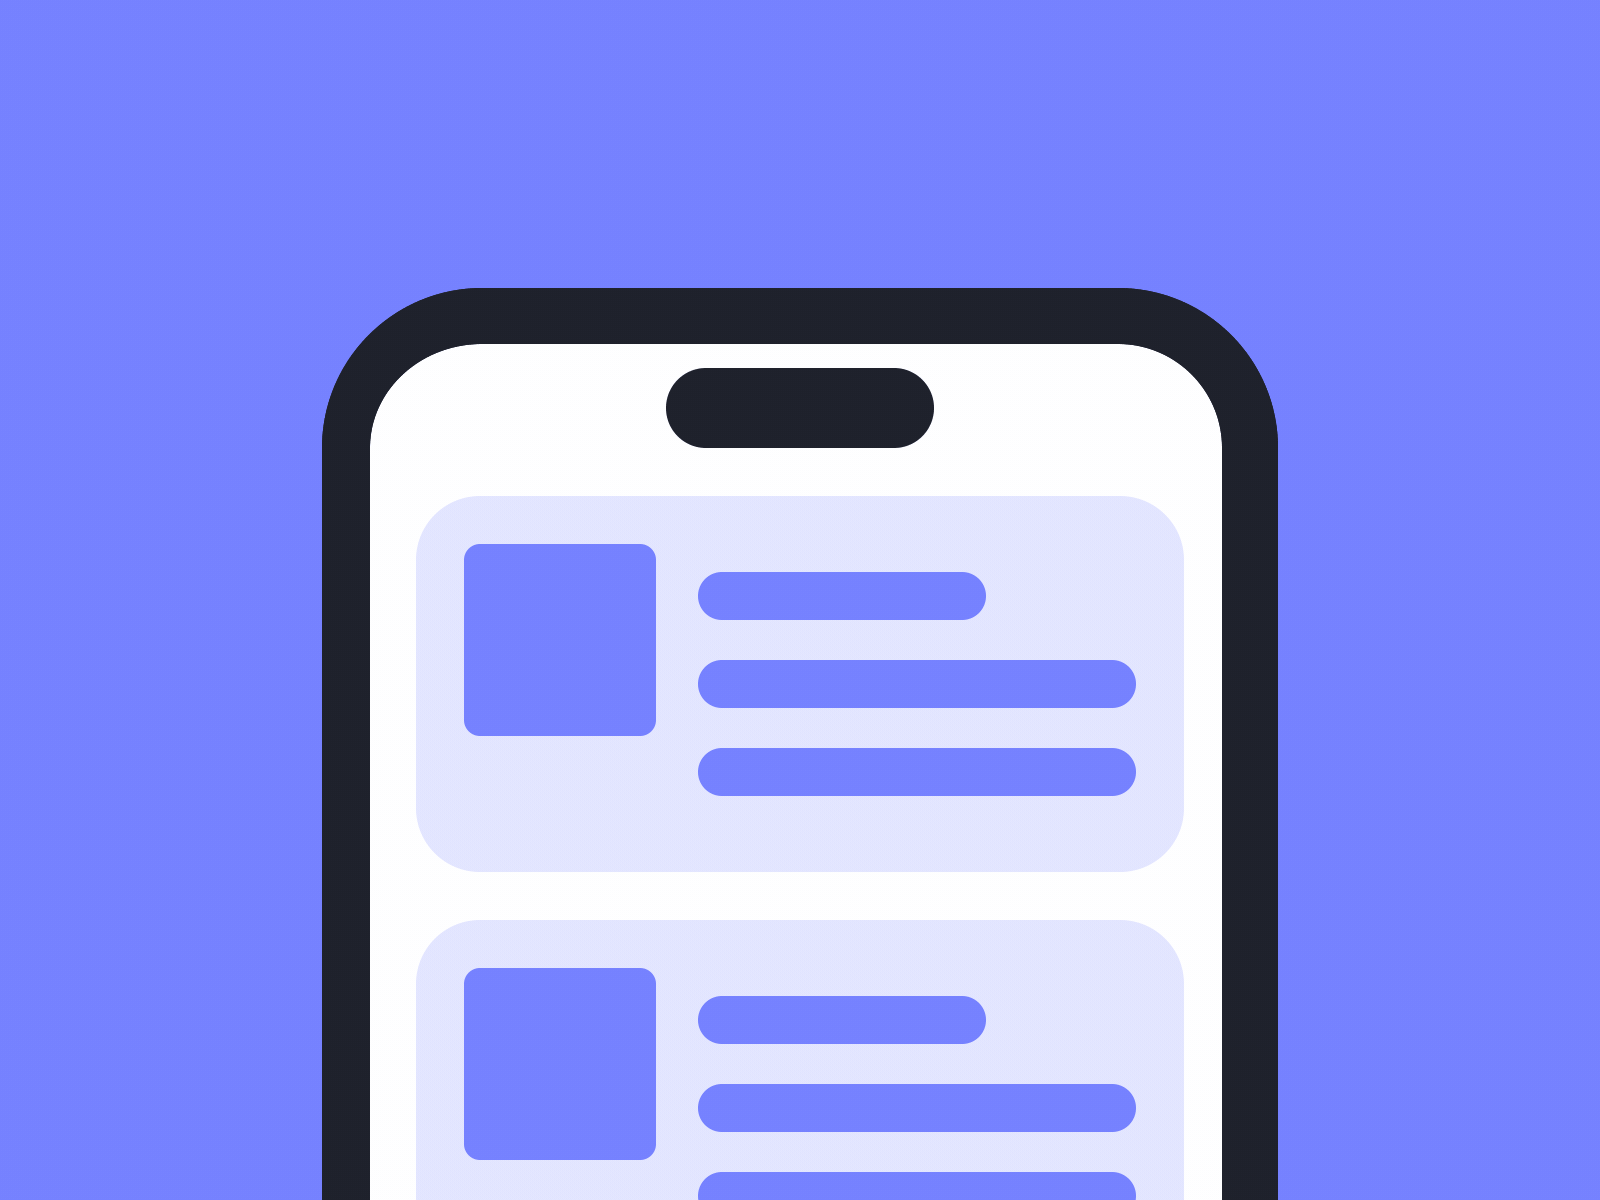 Pull To Add A New Item add animation dynamic island interaction design ios iphone microinteractions mobile design mobile patterns motion ui pull to add ui ui animation ui design ux